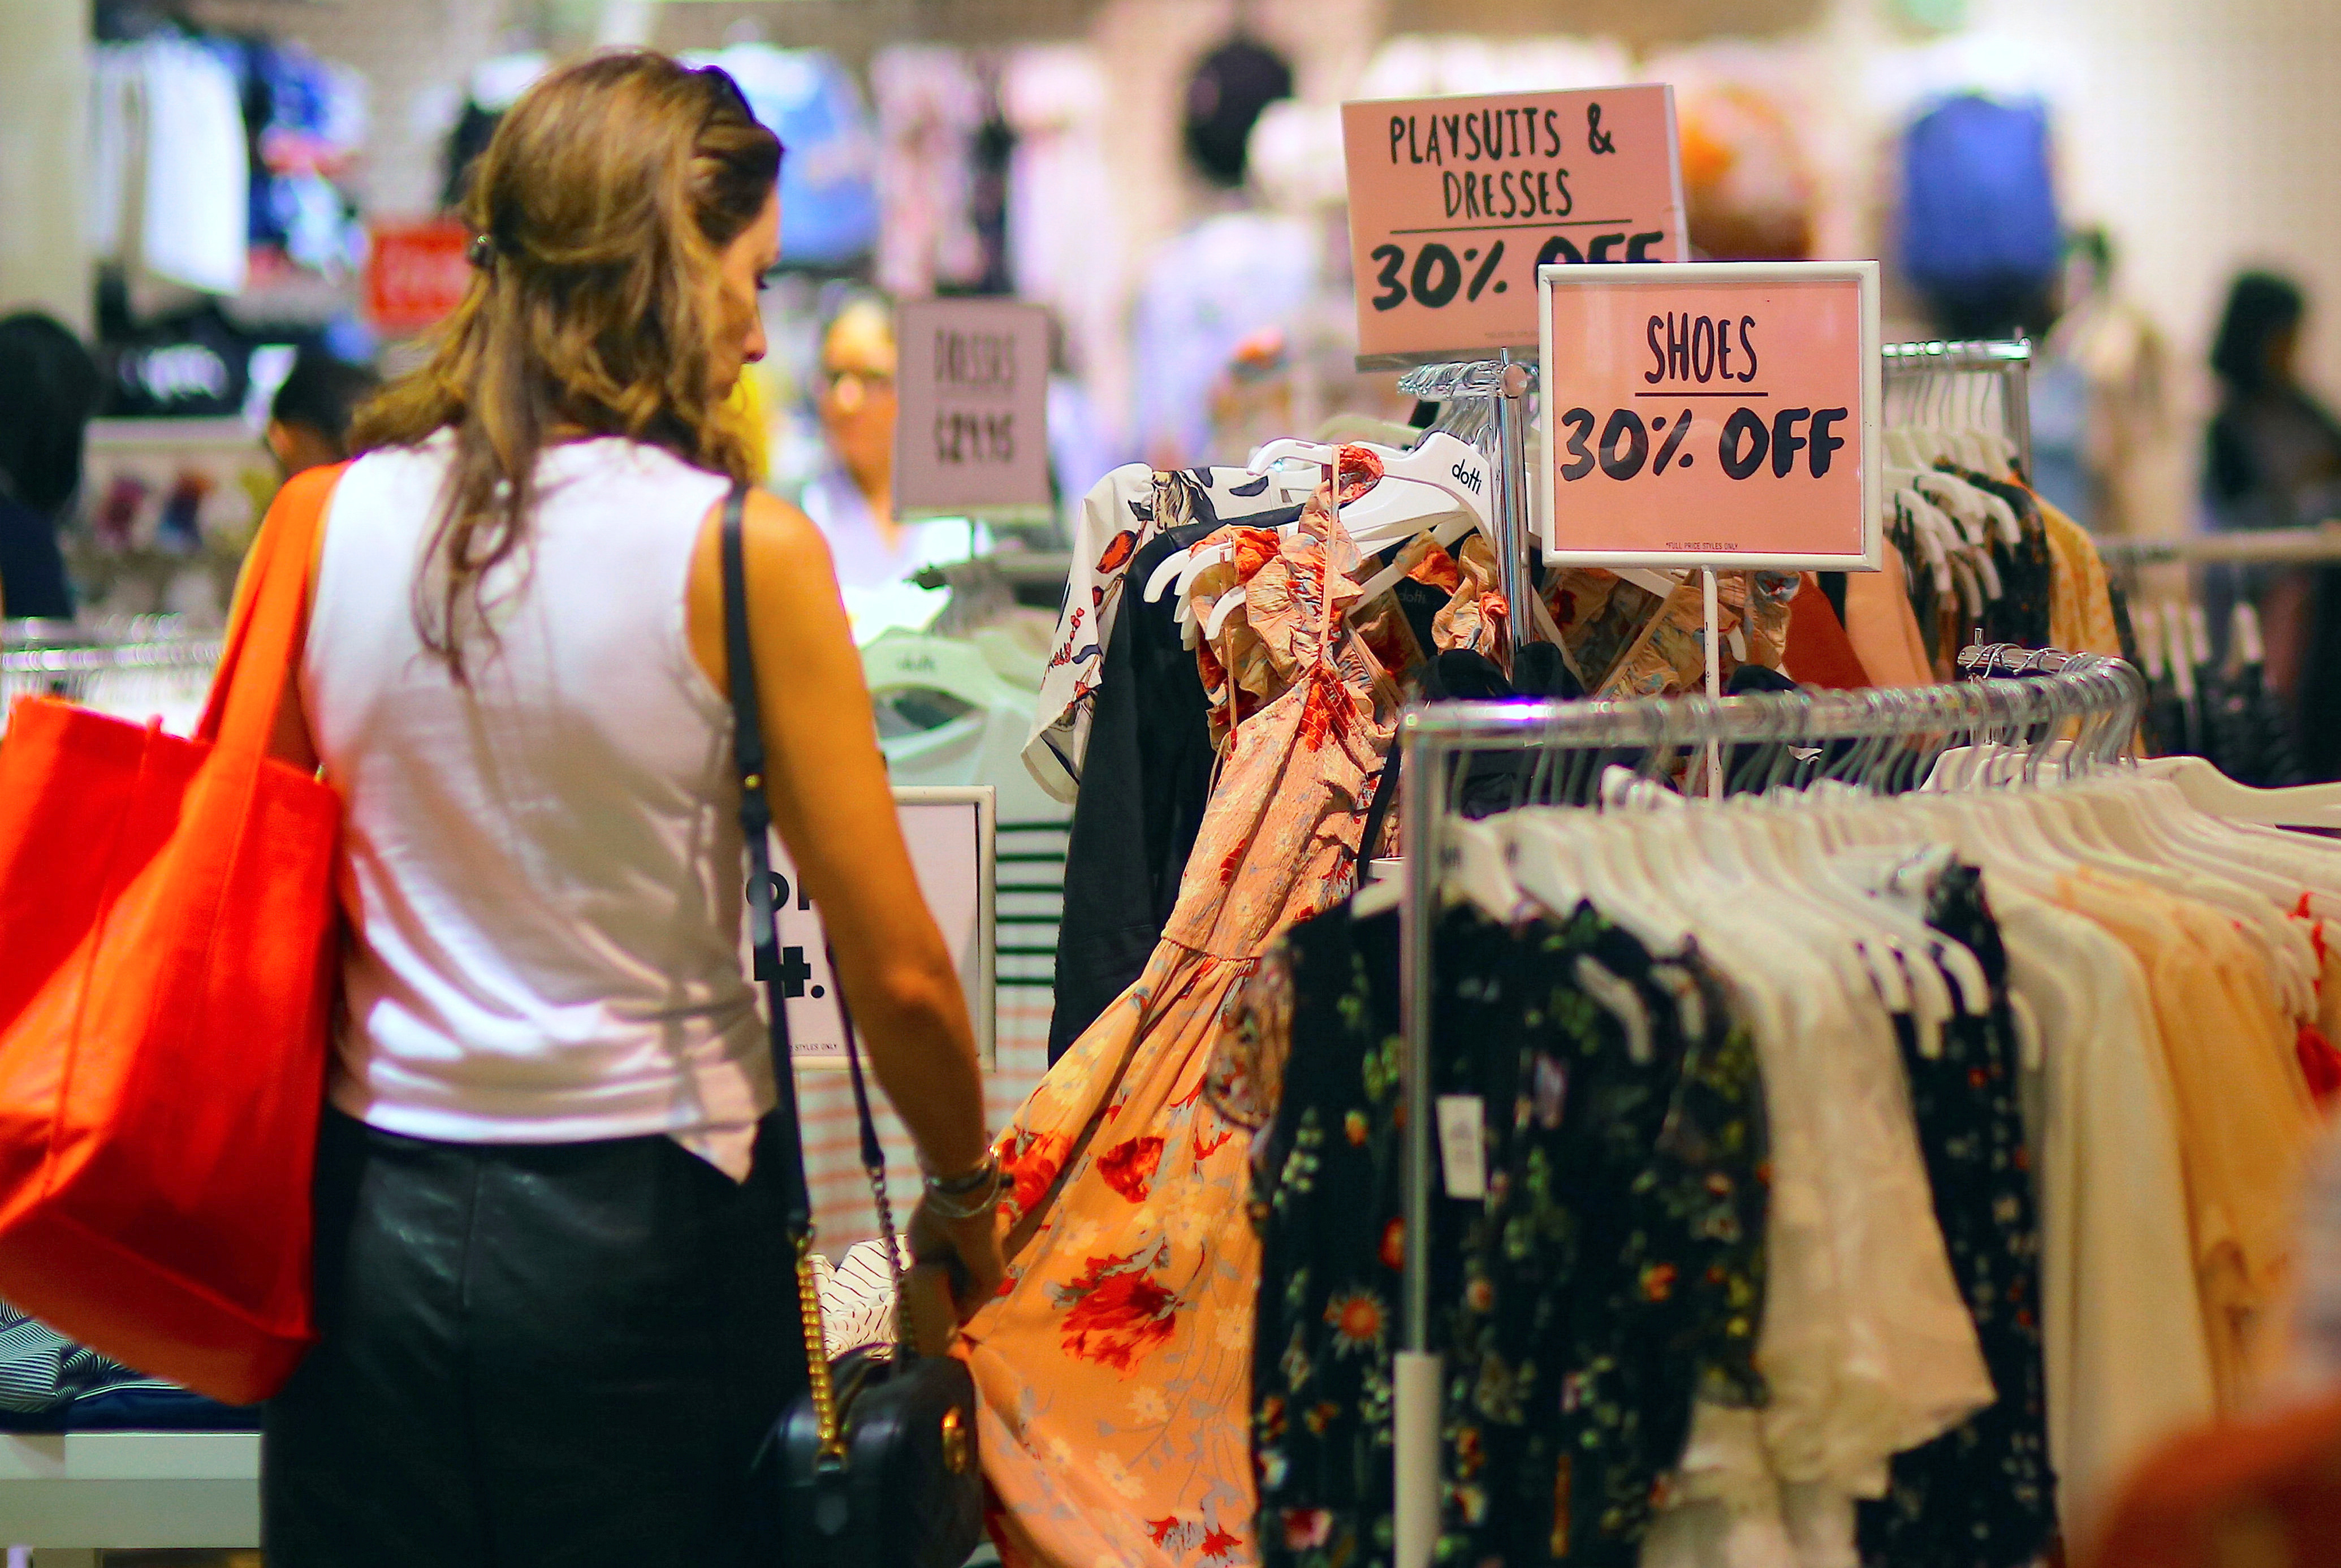 A shopper touches a dress as she inspects clothes on display next to sale signs at a retail store in central Sydney